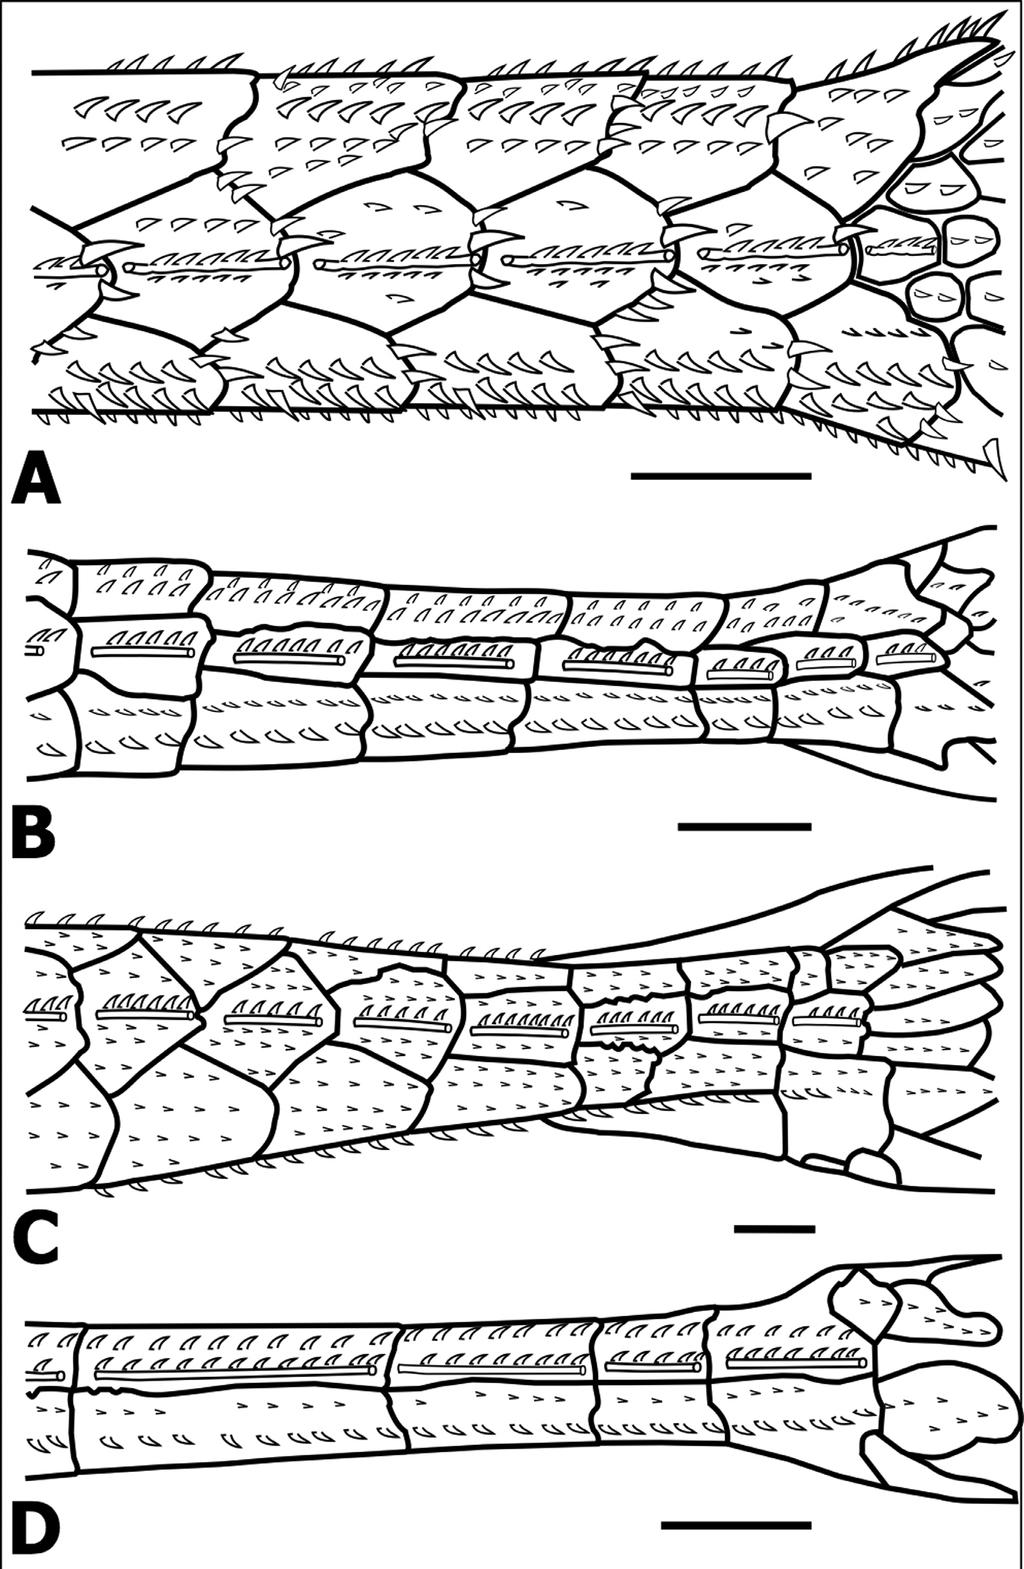 FIGURE 1. Left lateral view of the posterior caudal peduncle of (A) Oxyropsis ephippia, (B) O.